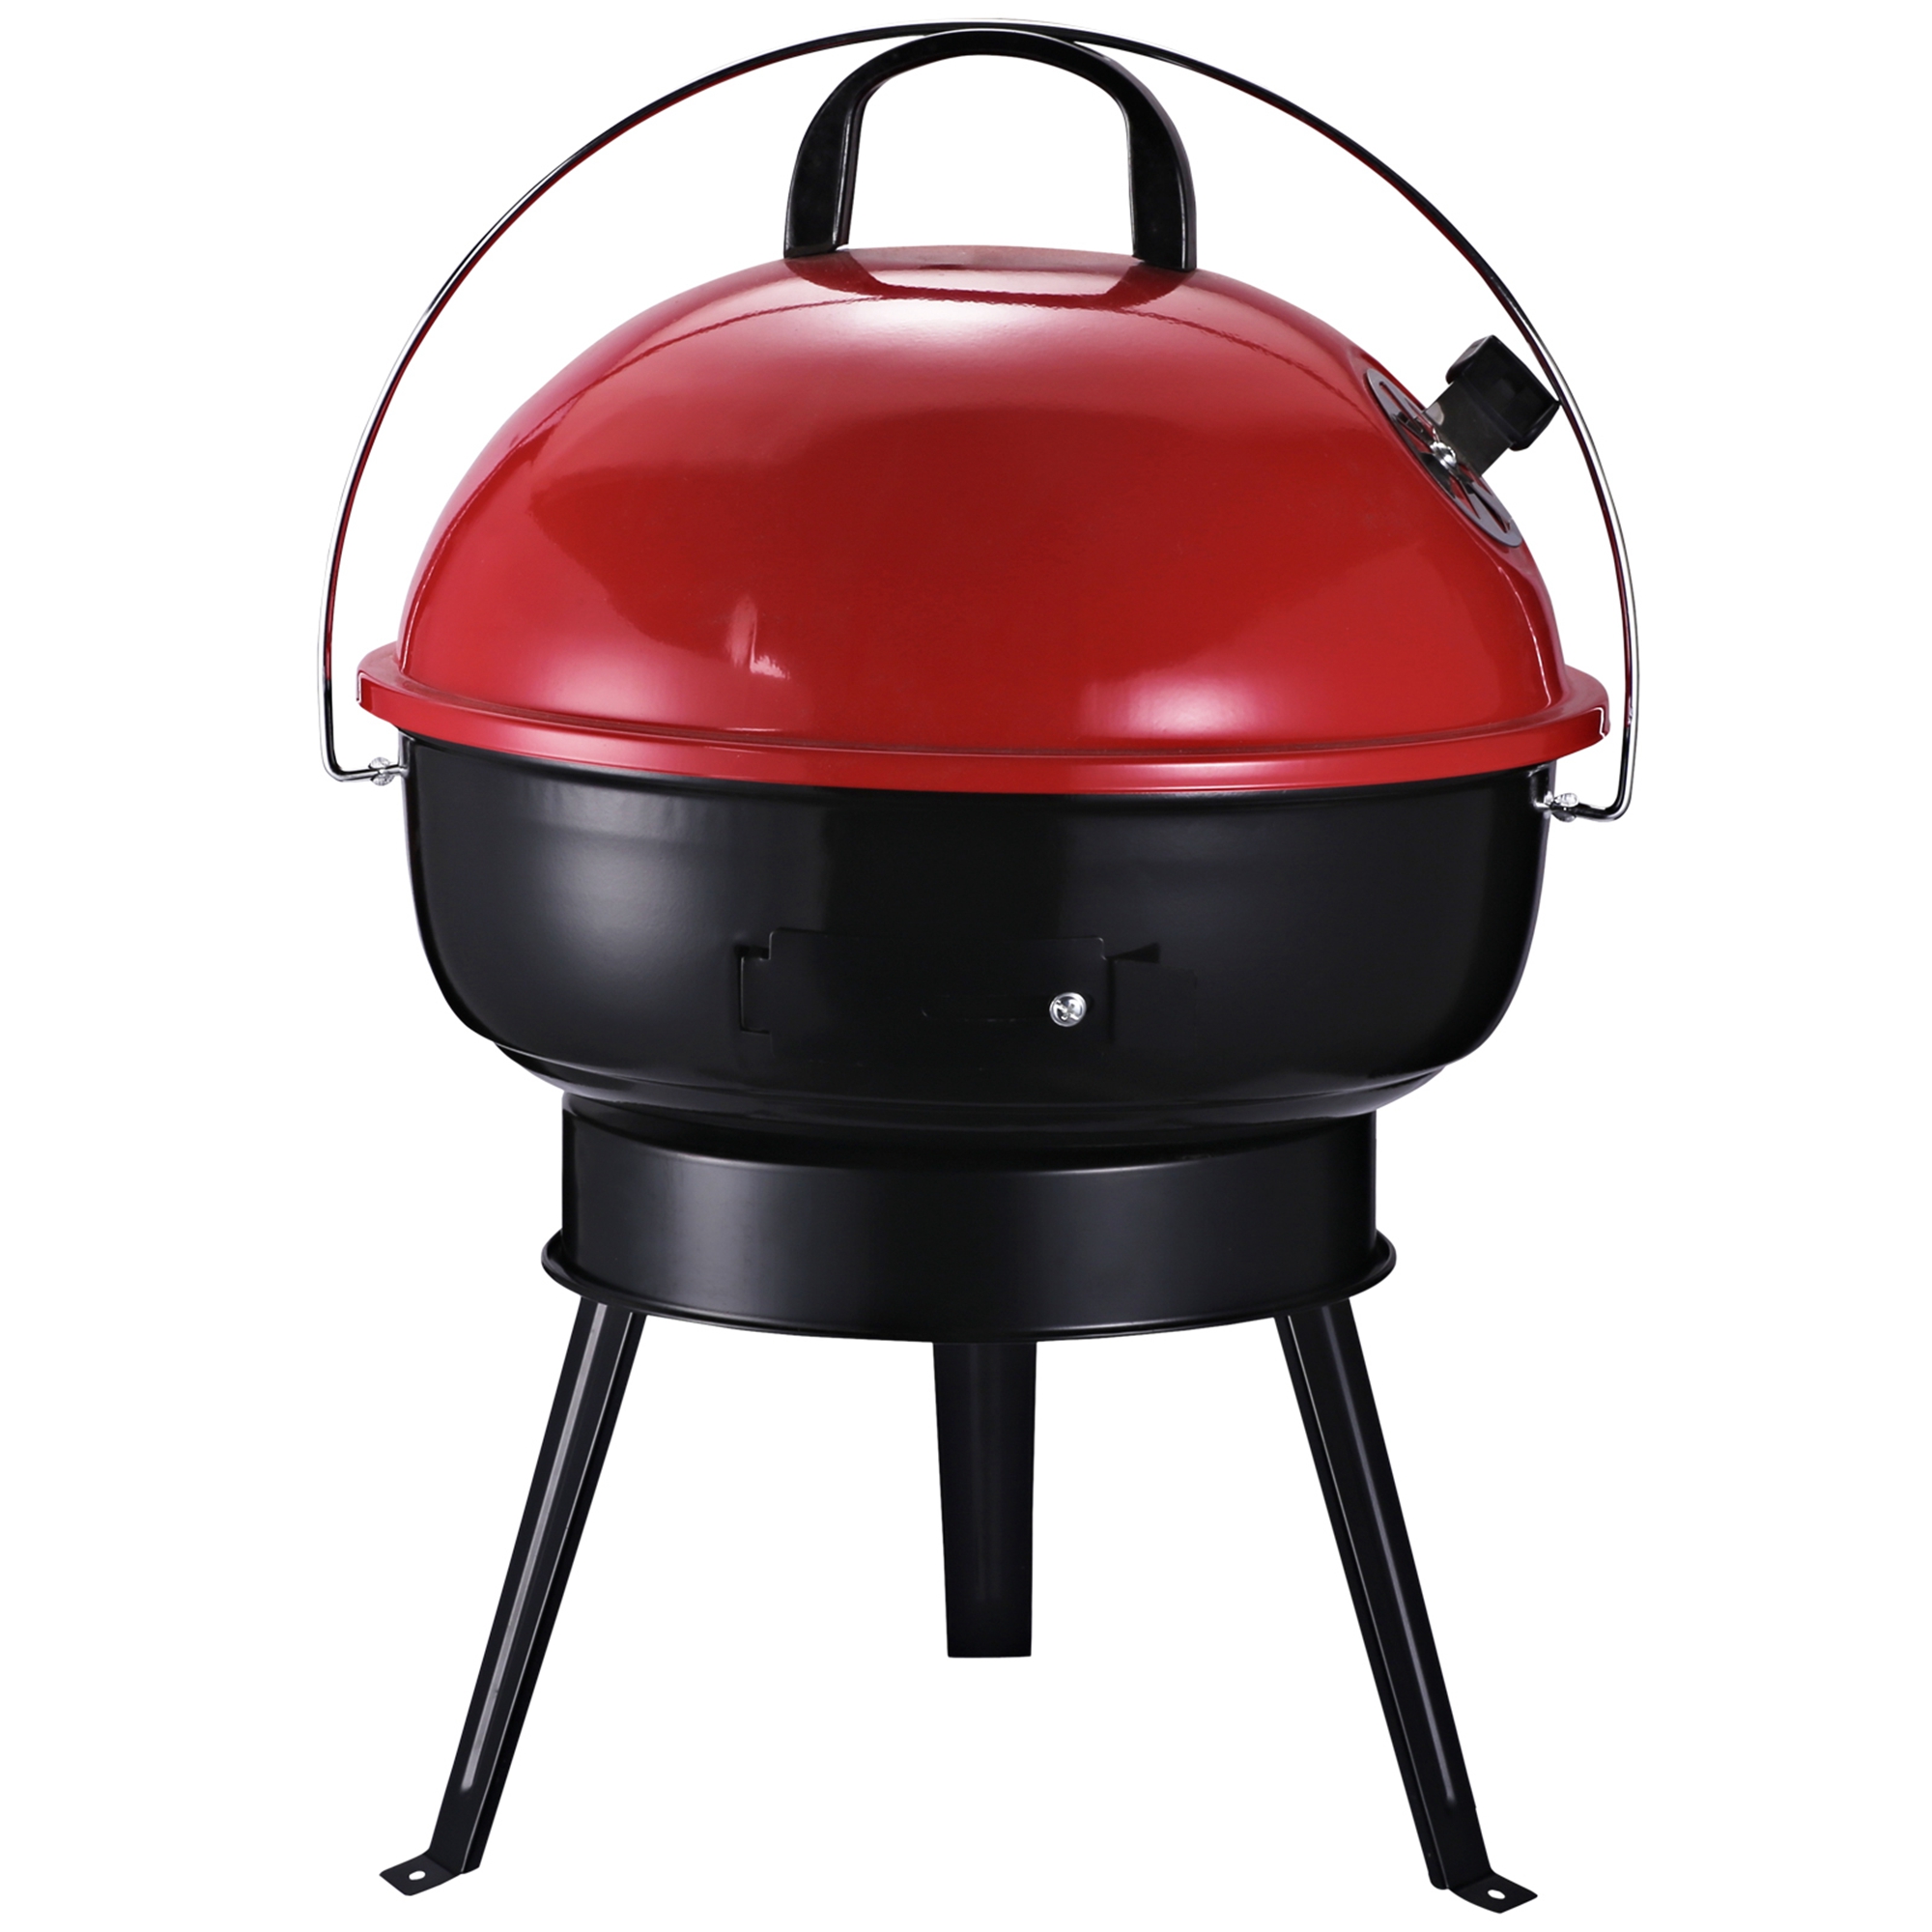 Outsunny Charcoal Bbq Charcoal Grill Metal Portable Tripod Grill Black Red